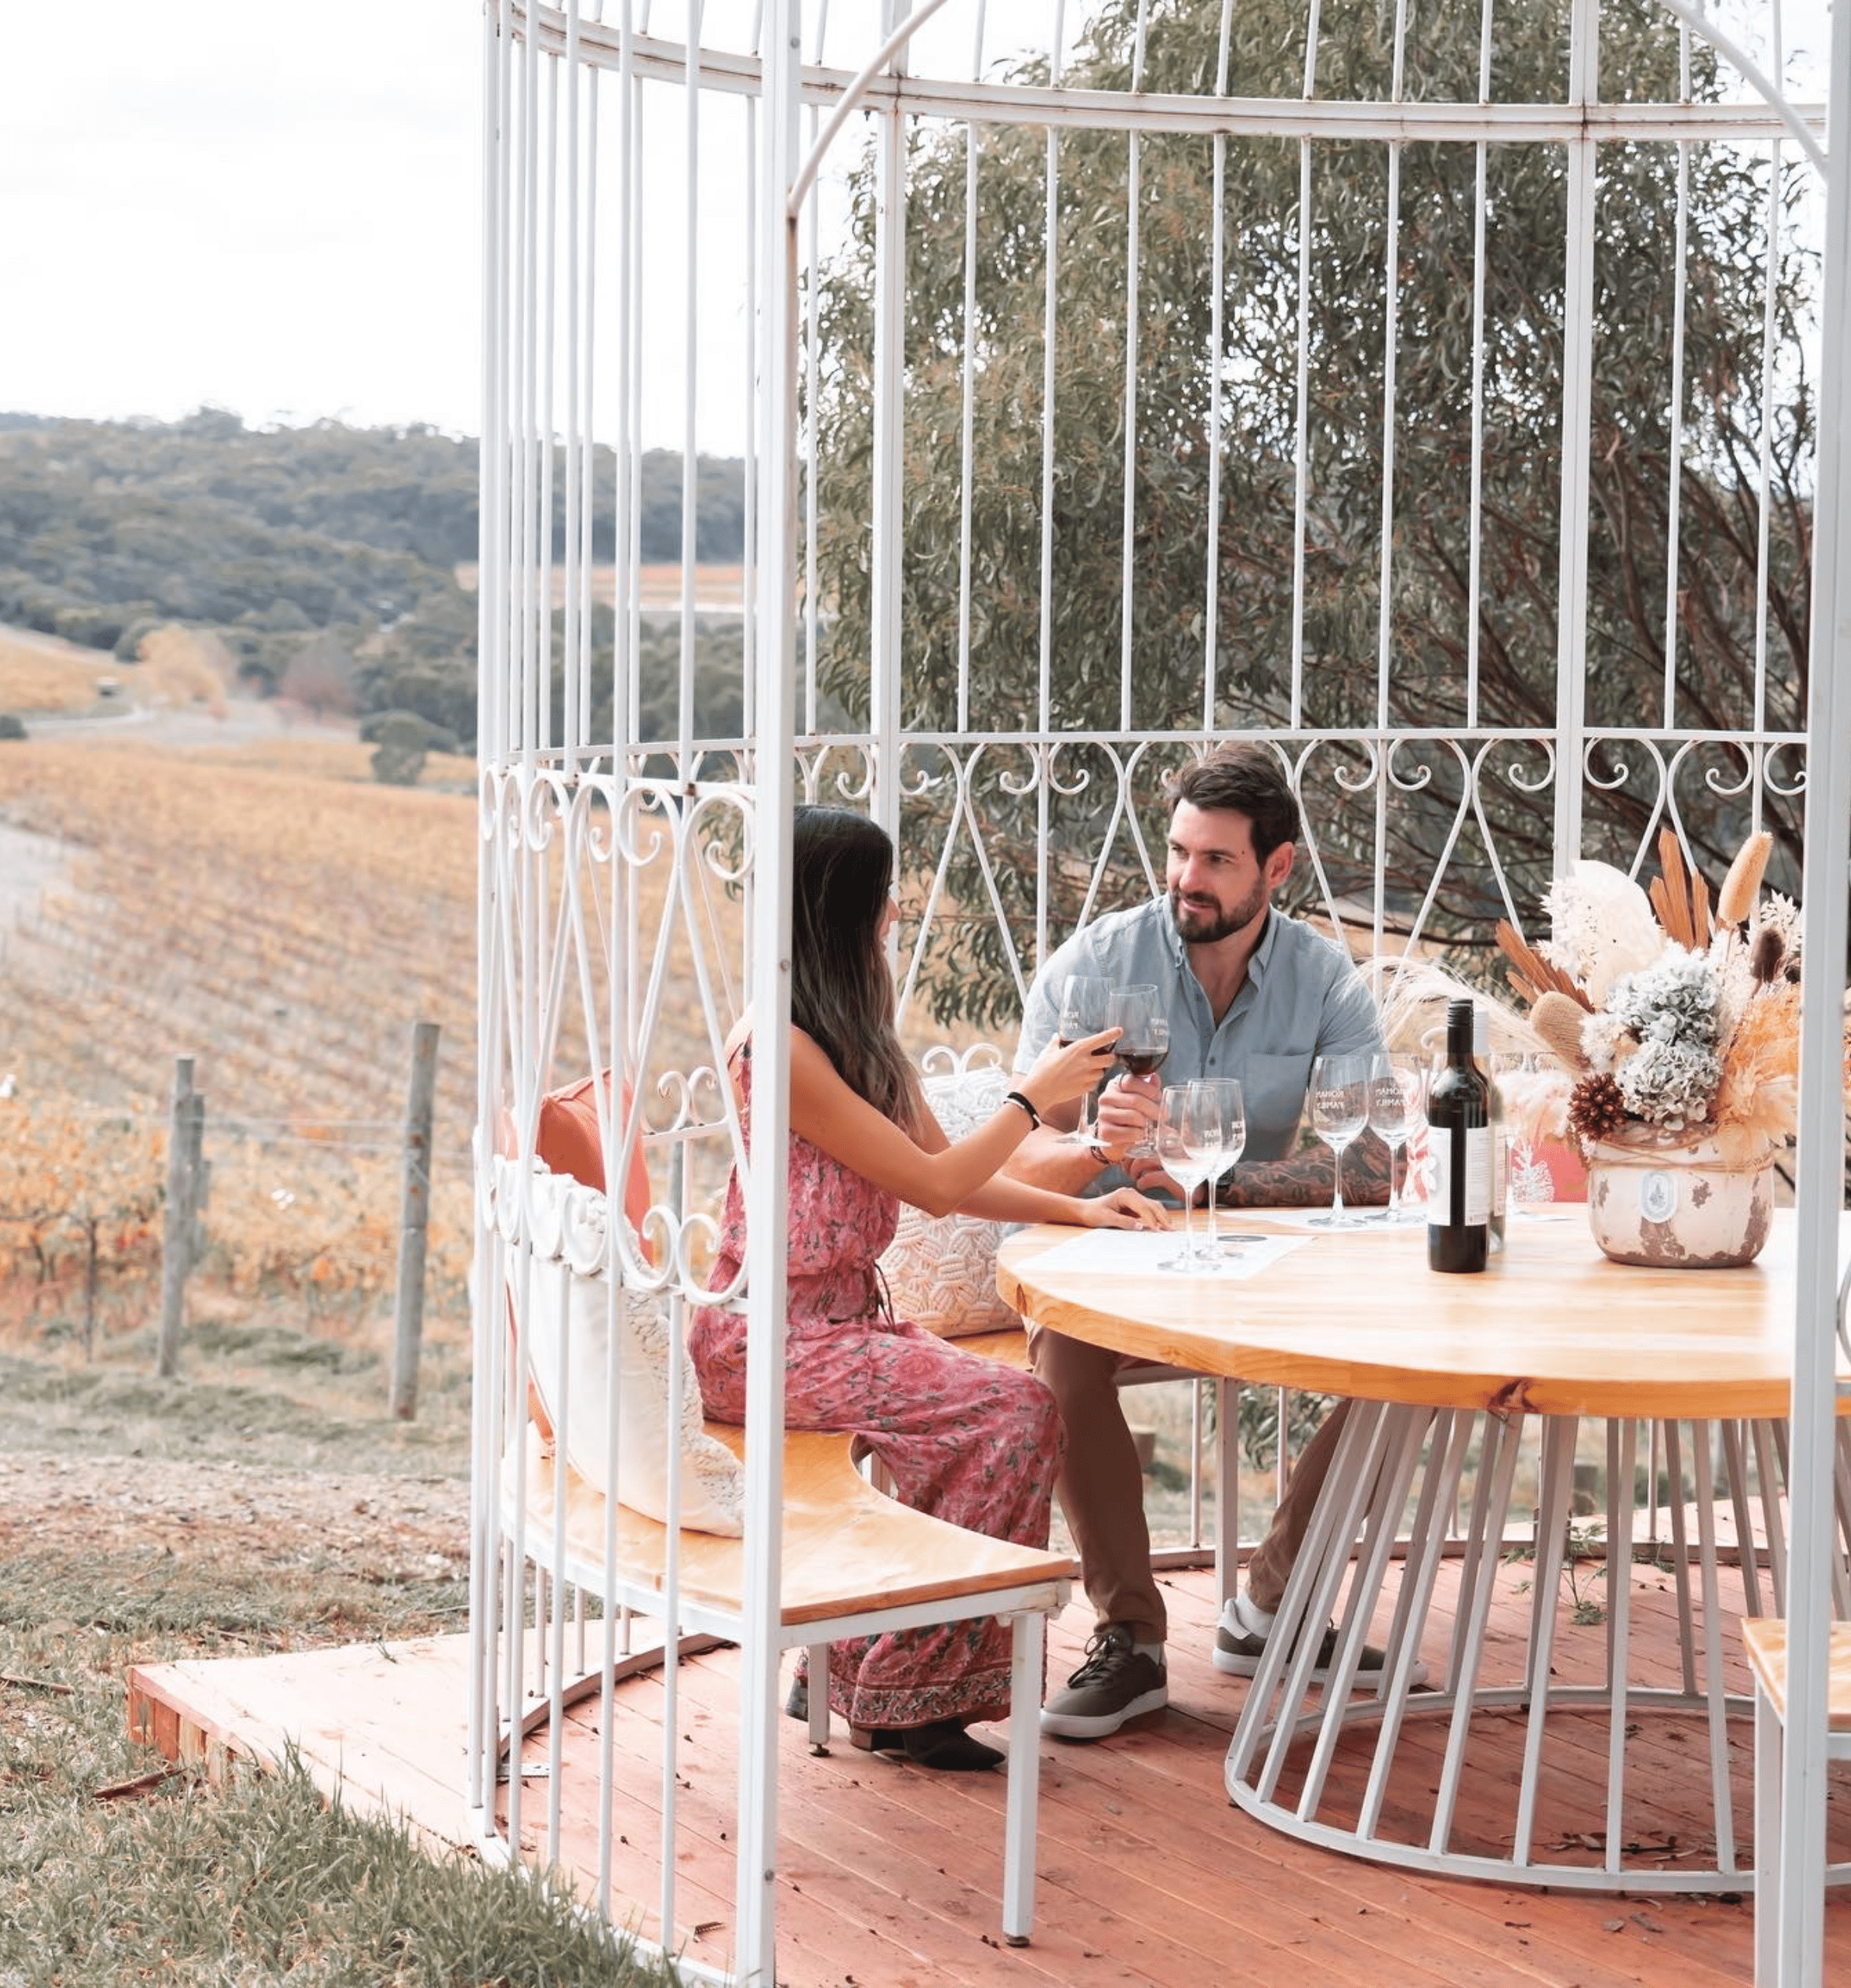 man and woman sitting in large birdcage near vineyard drinking wine